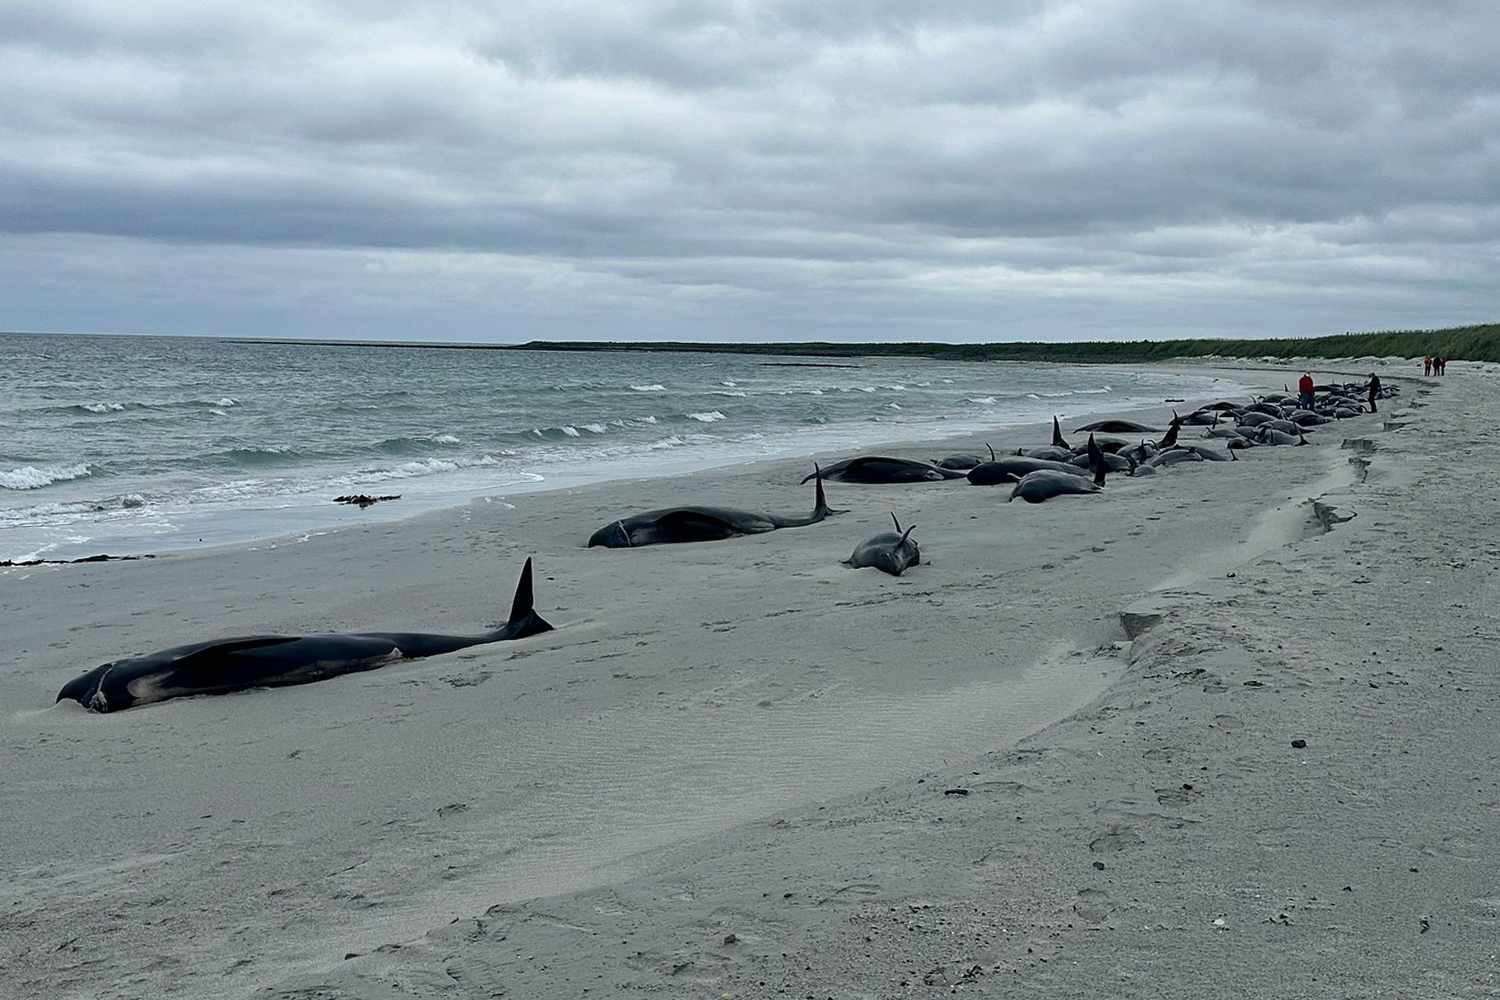 Over 70 Whales Dead After Becoming Stranded on Orkney: An 'Incredibly Difficult Situation'